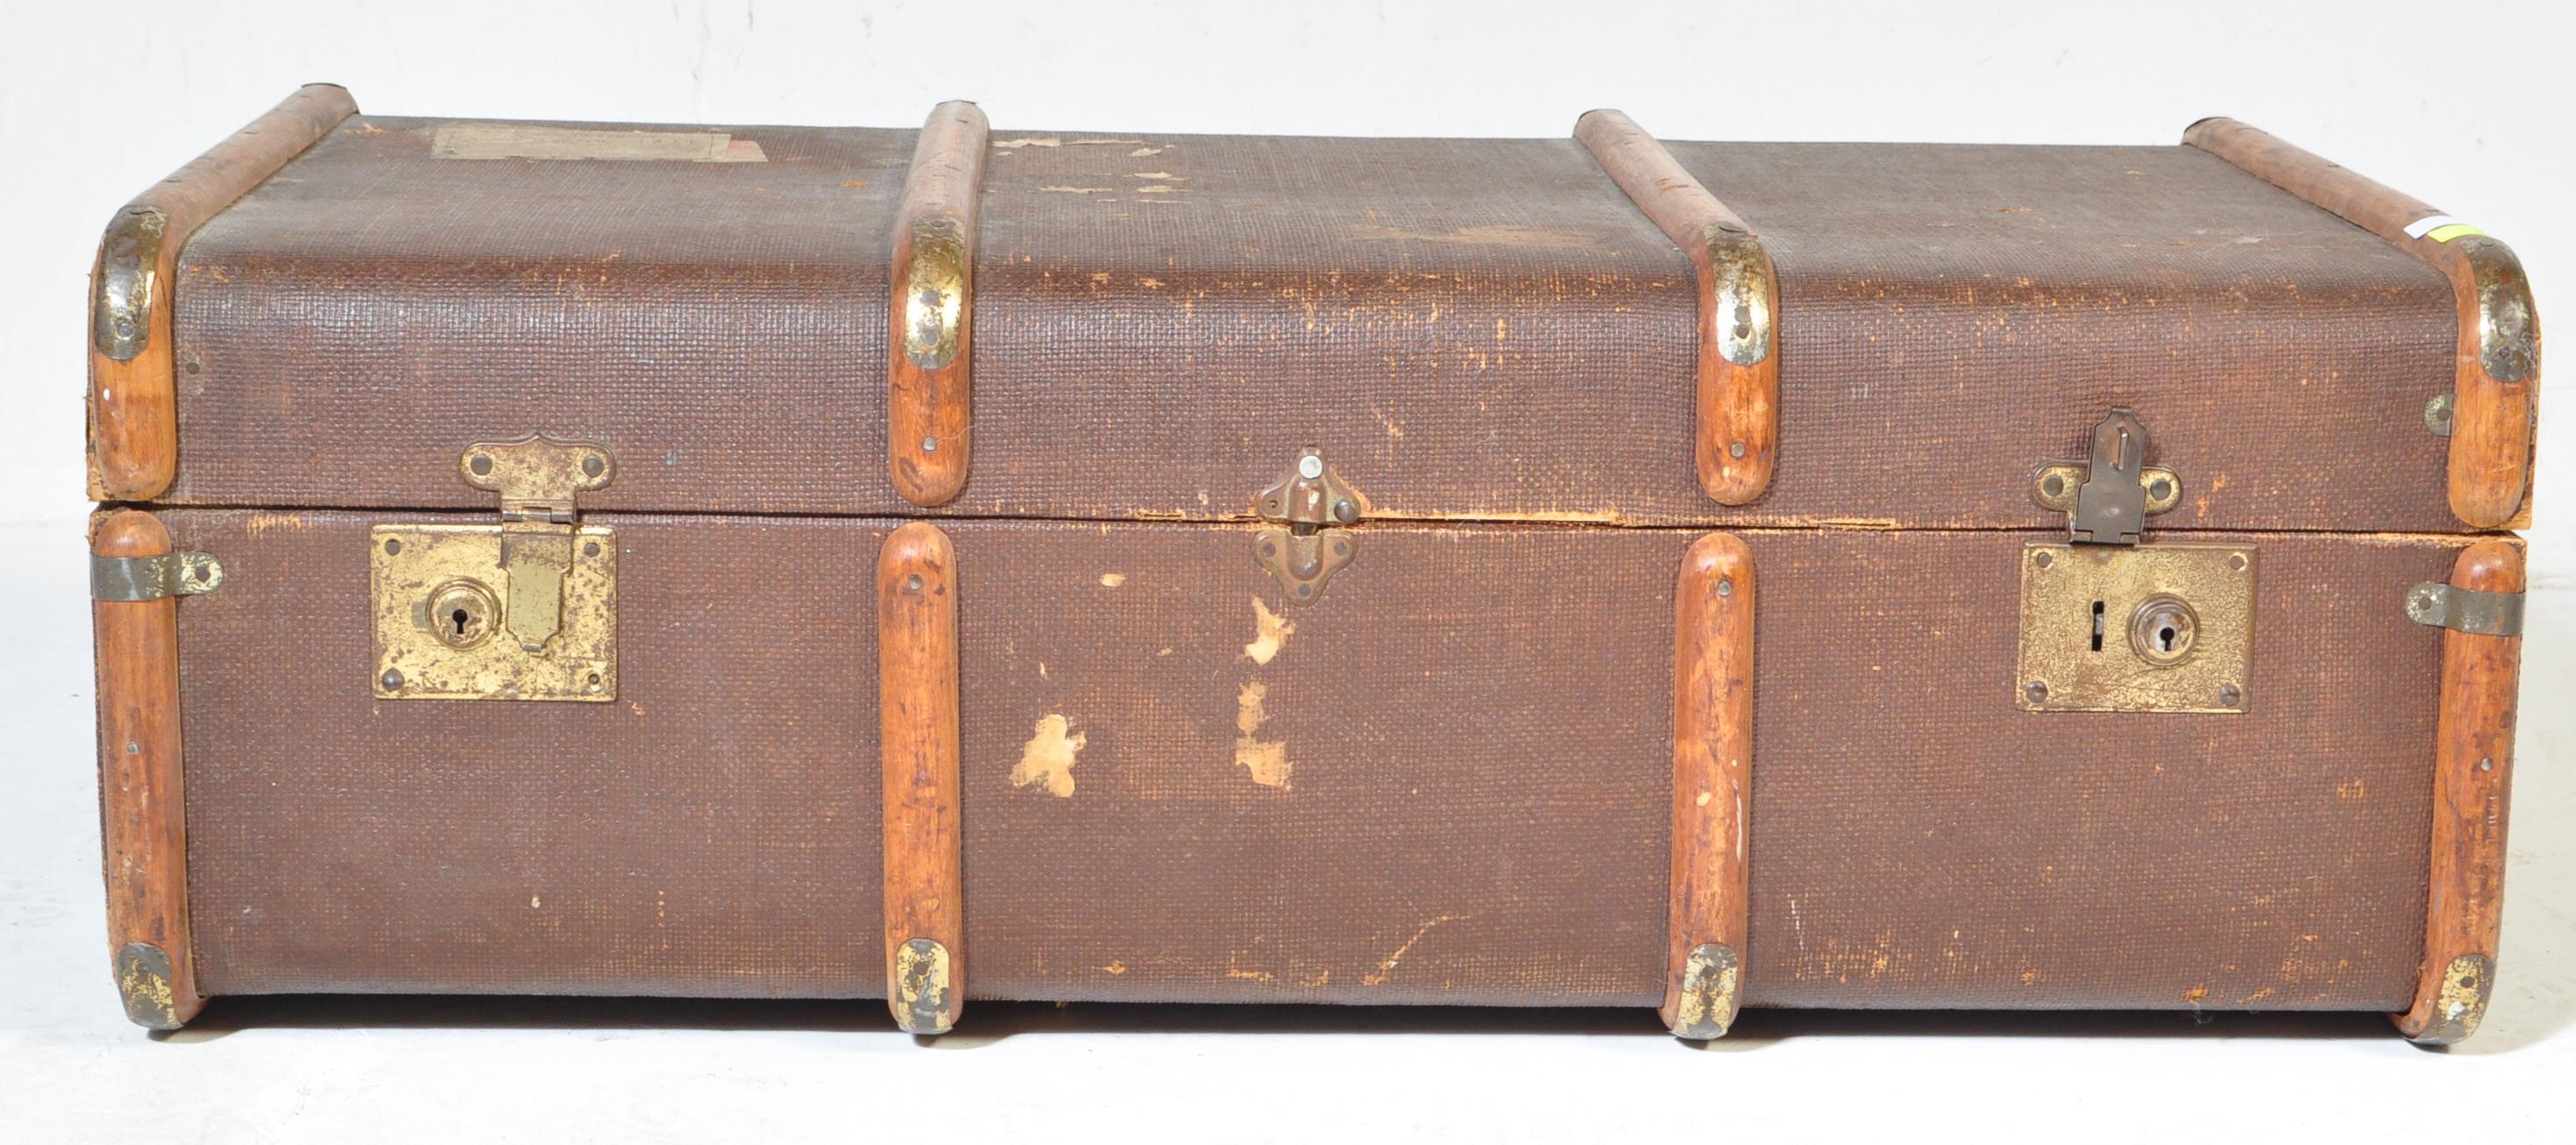 VINTAGE EARLY 20TH CENTURY RAILWAY TRAVEL SUITCASE - Image 3 of 6